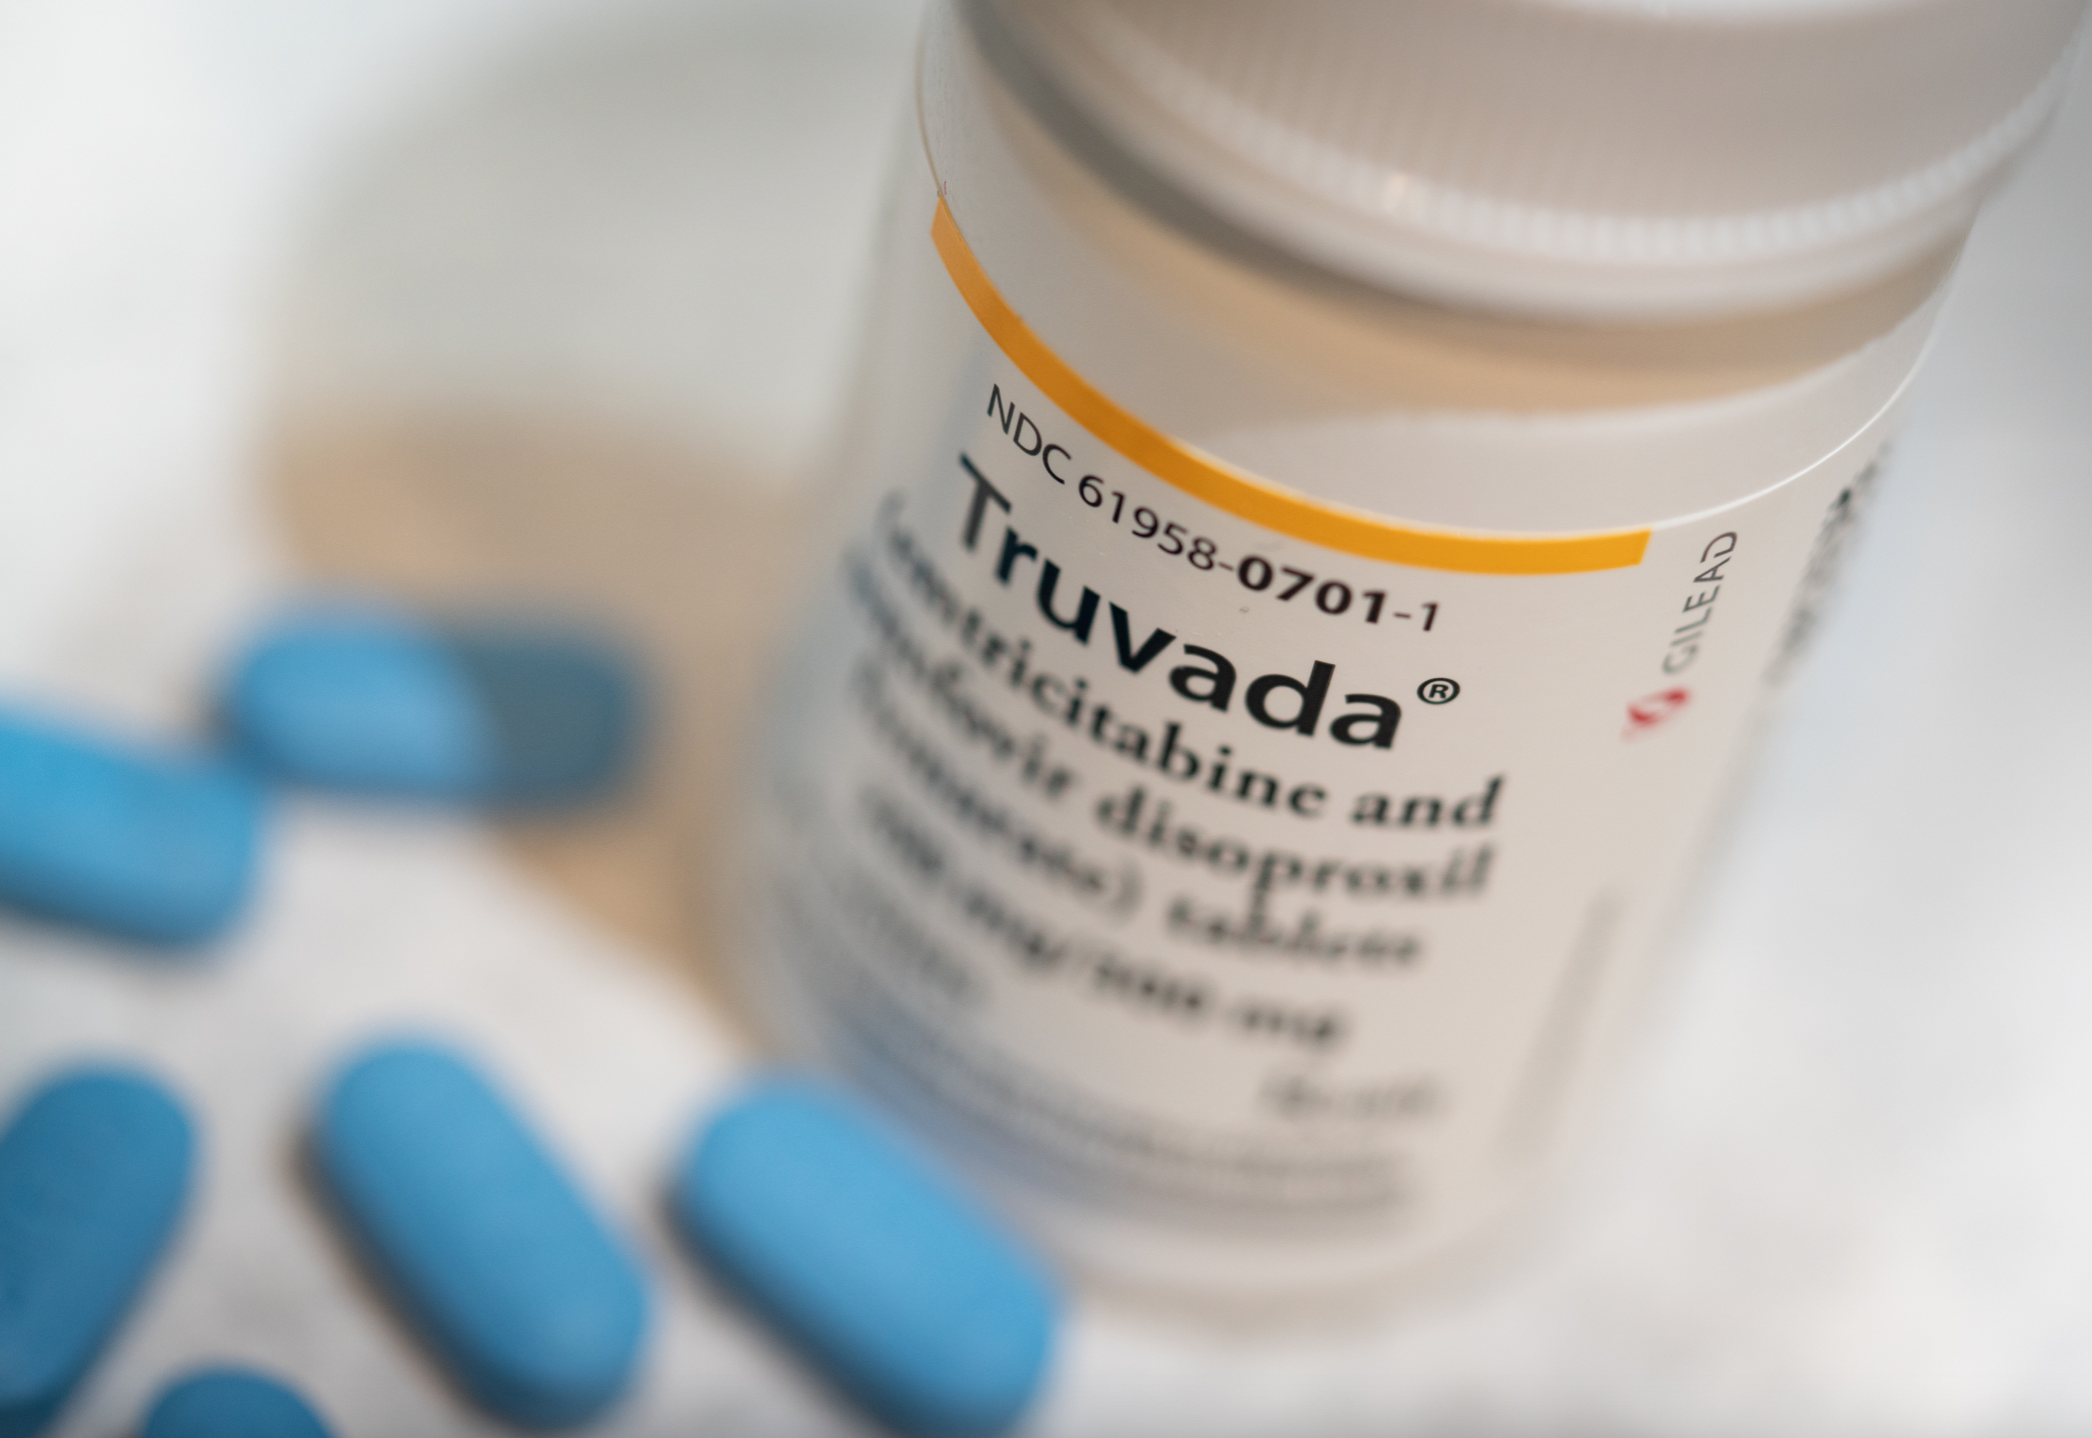 Bottle of Truvada, with pills around it; image by Tony Webster from Minneapolis, Minnesota, United States, CC BY-SA 2.0, no changes made, via Wikimedia Commons.